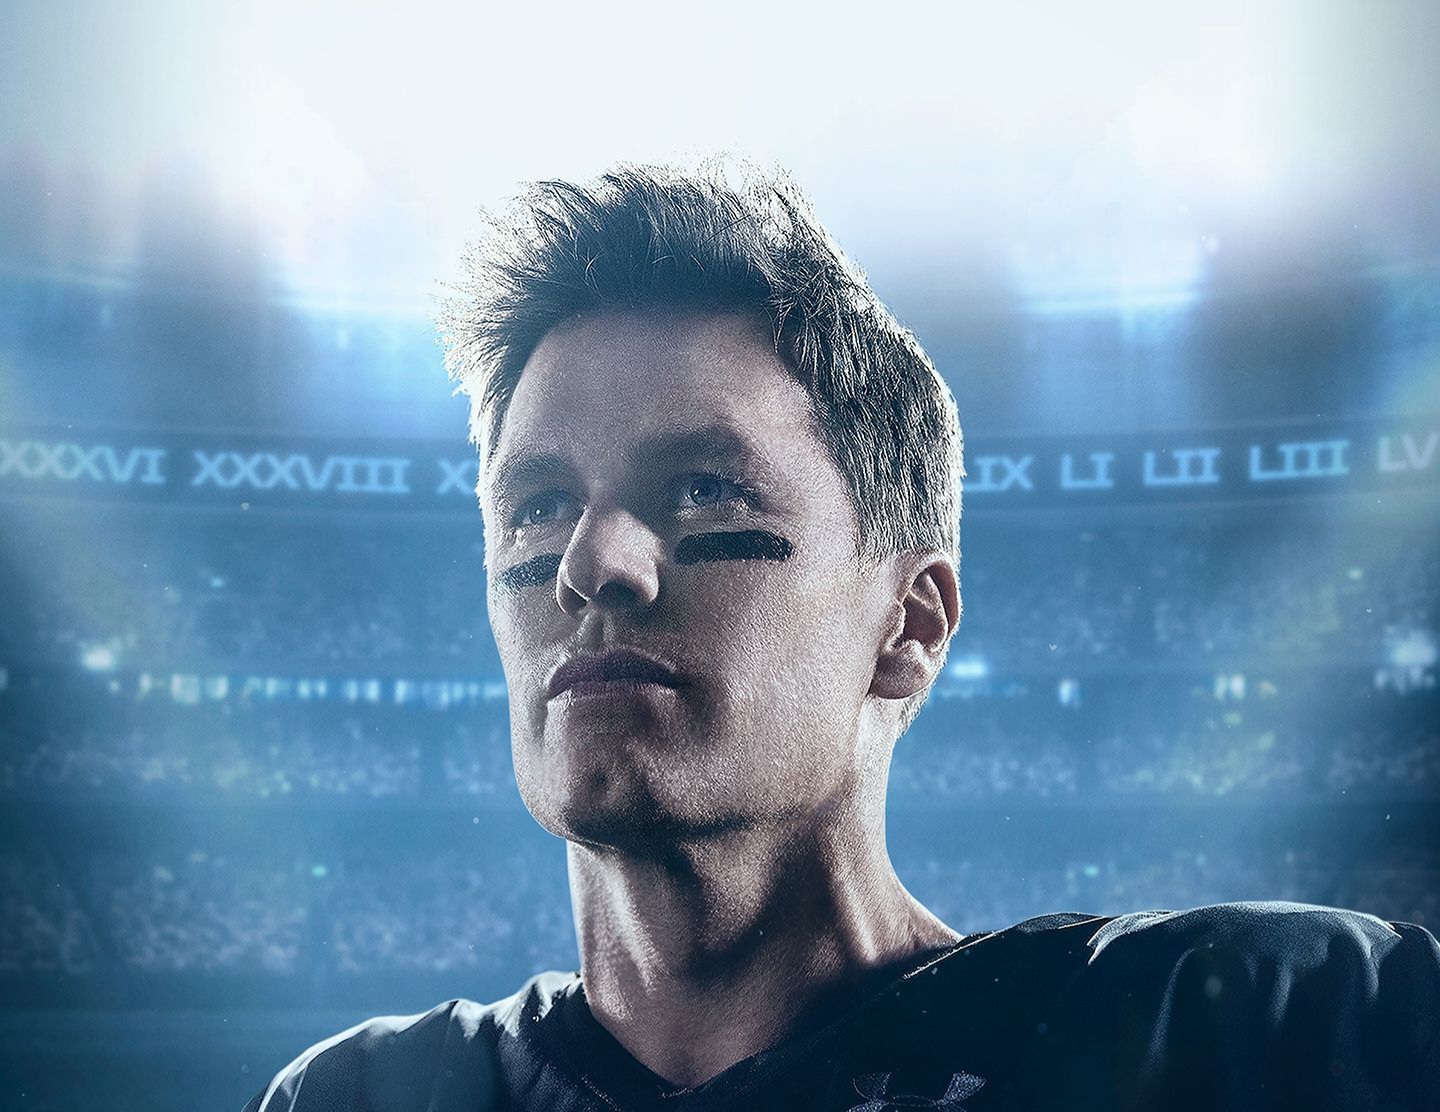 Tom Brady releases trailer for ESPN+ series about himself